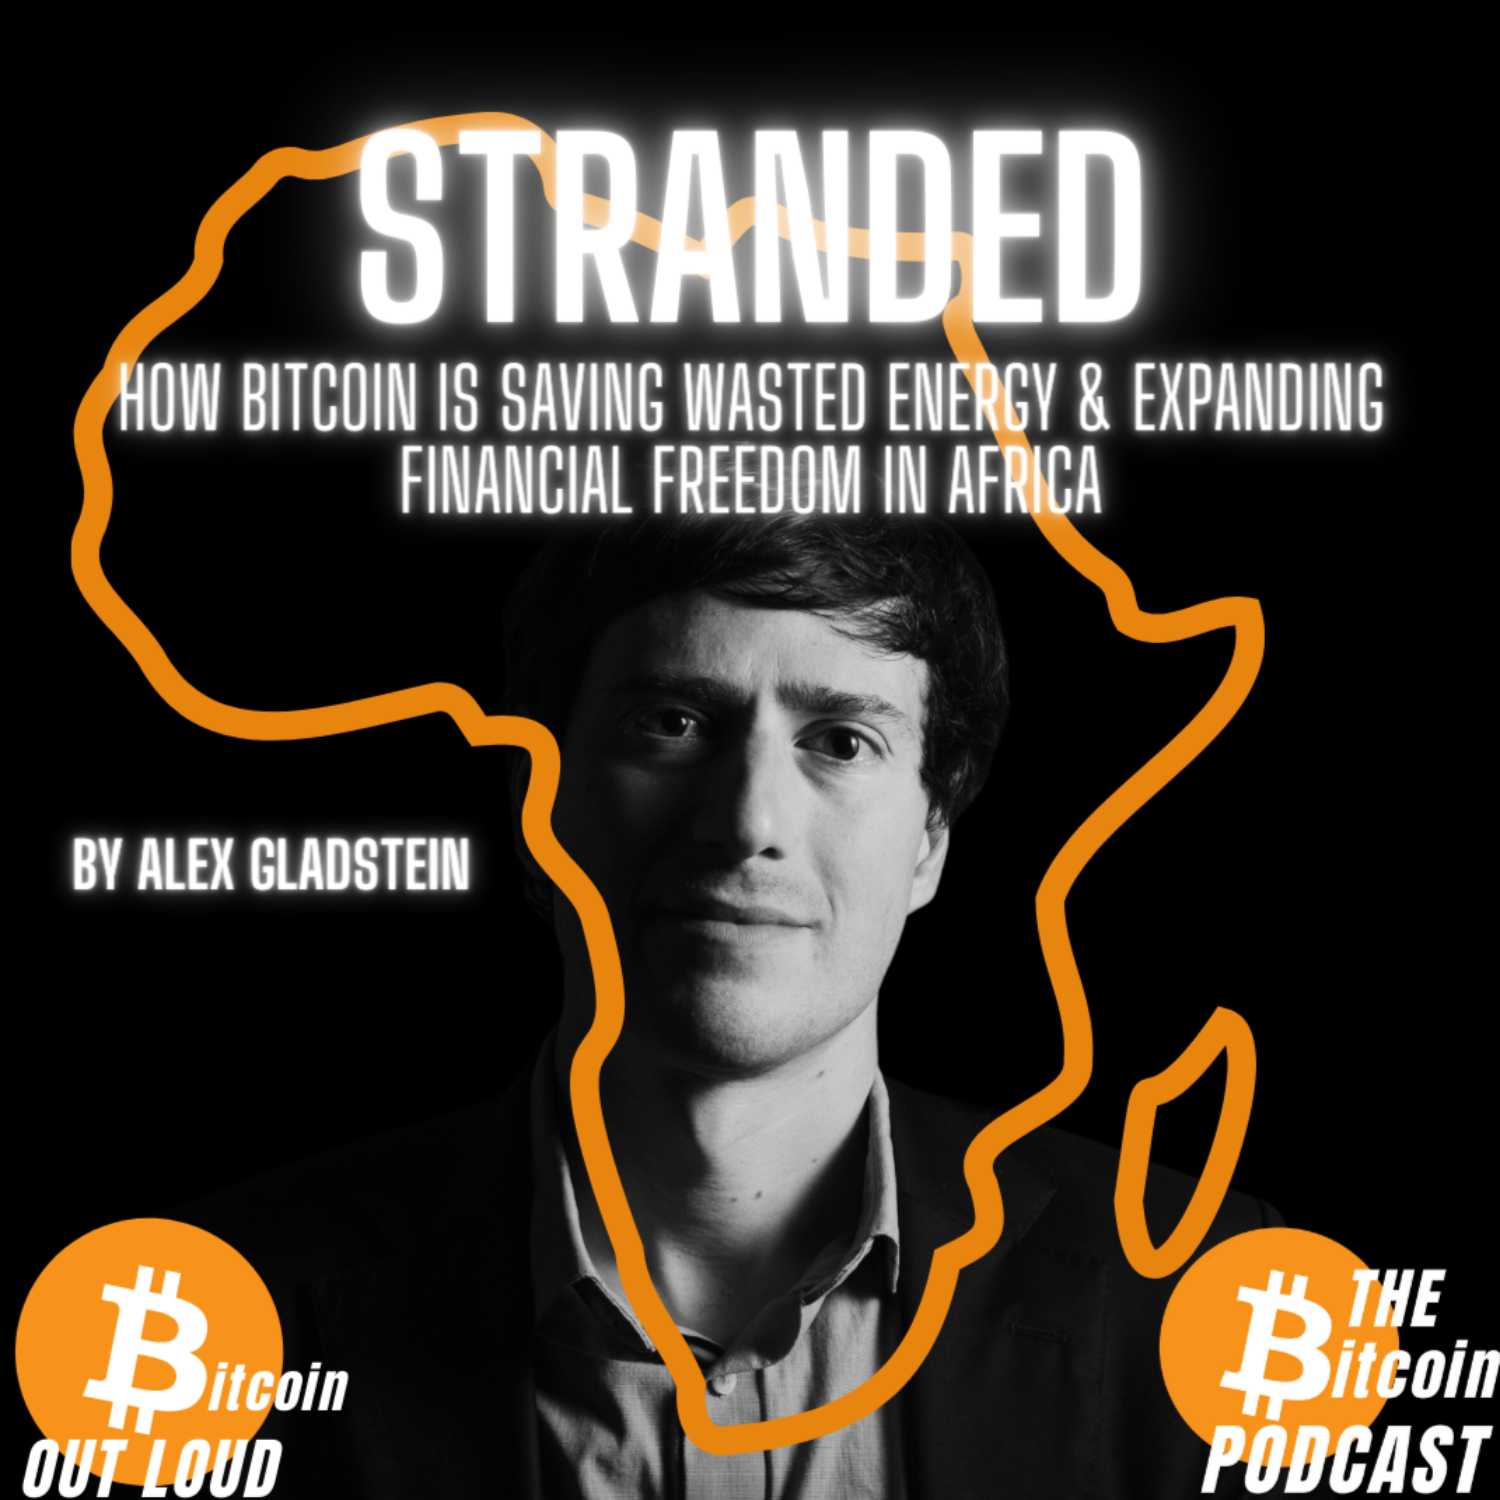 STRANDED: How Bitcoin is Saving Wasted Energy & Expanding Financial Freedom in Africa, by Alex Gladstein (Bitcoin Out Loud)